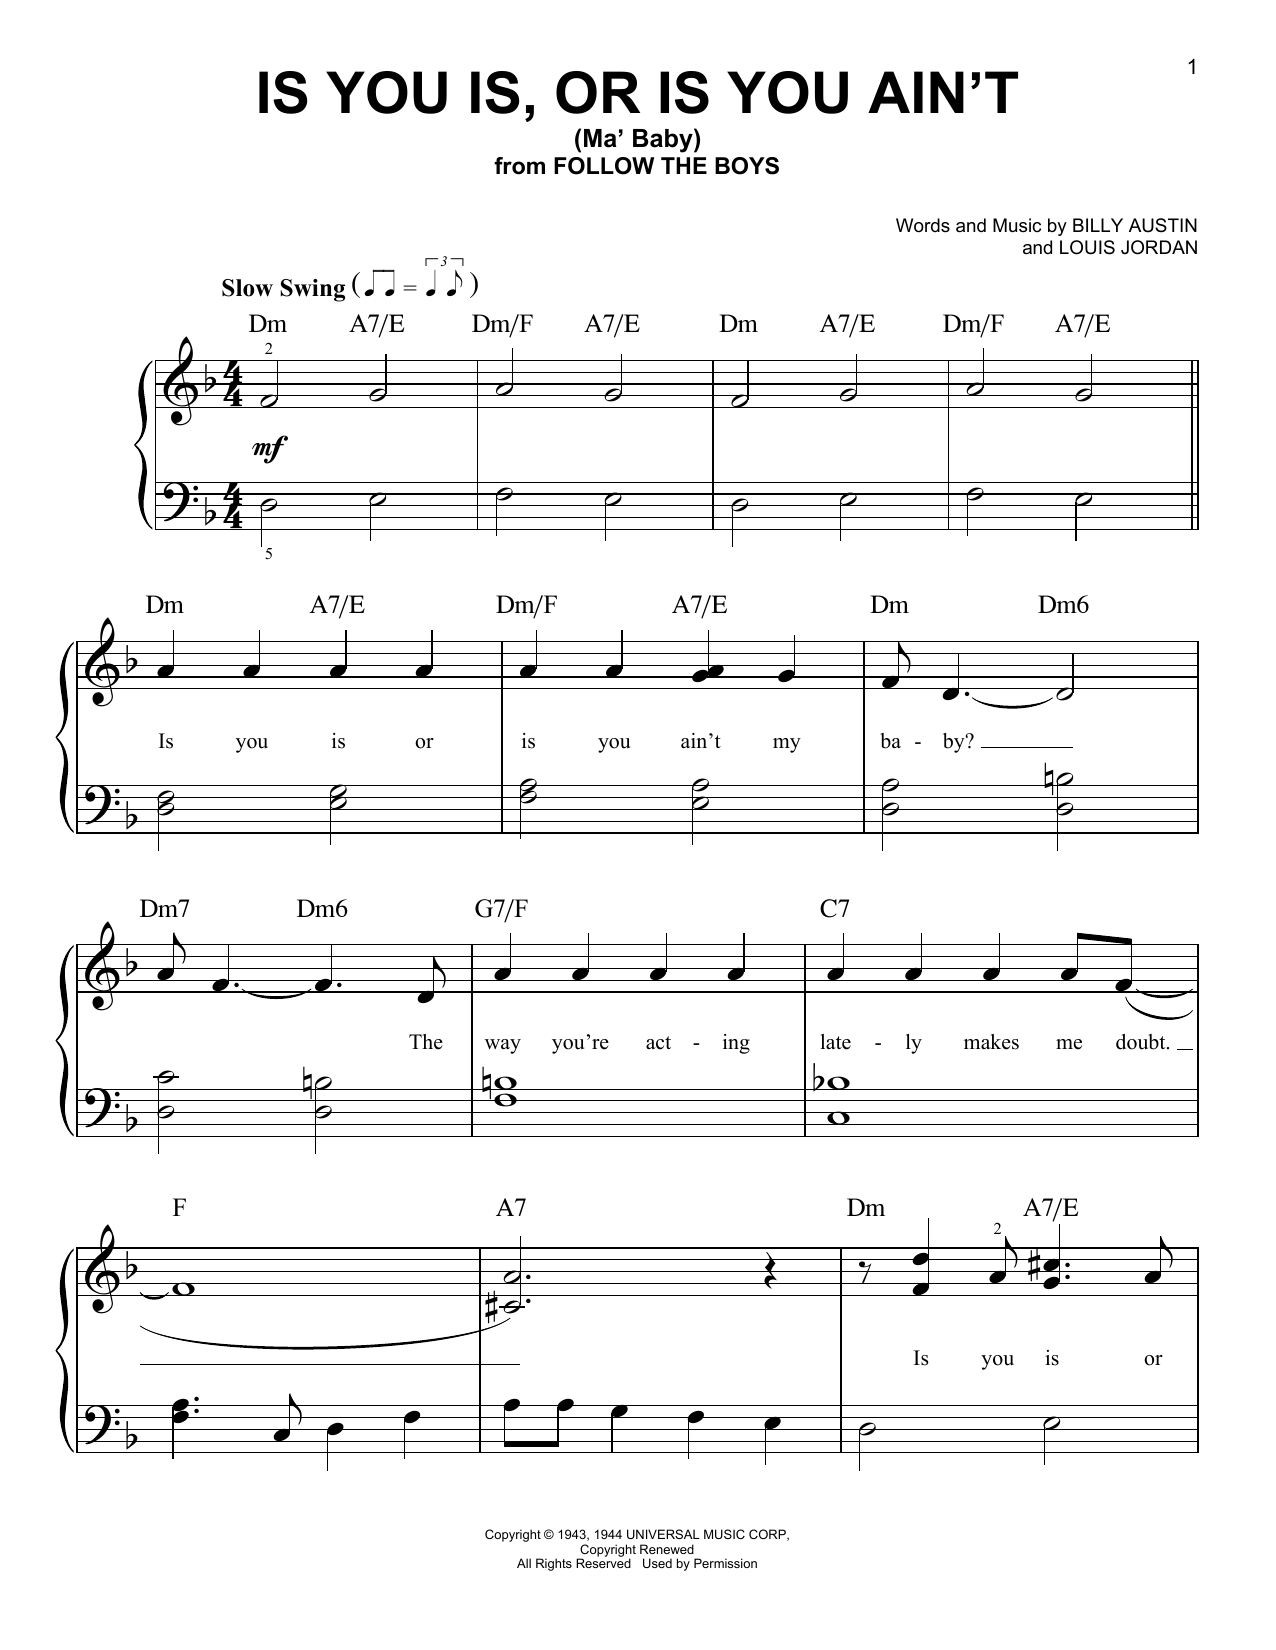 Download Louis Jordan Is You Is, Or Is You Ain't (Ma' Baby) Sheet Music